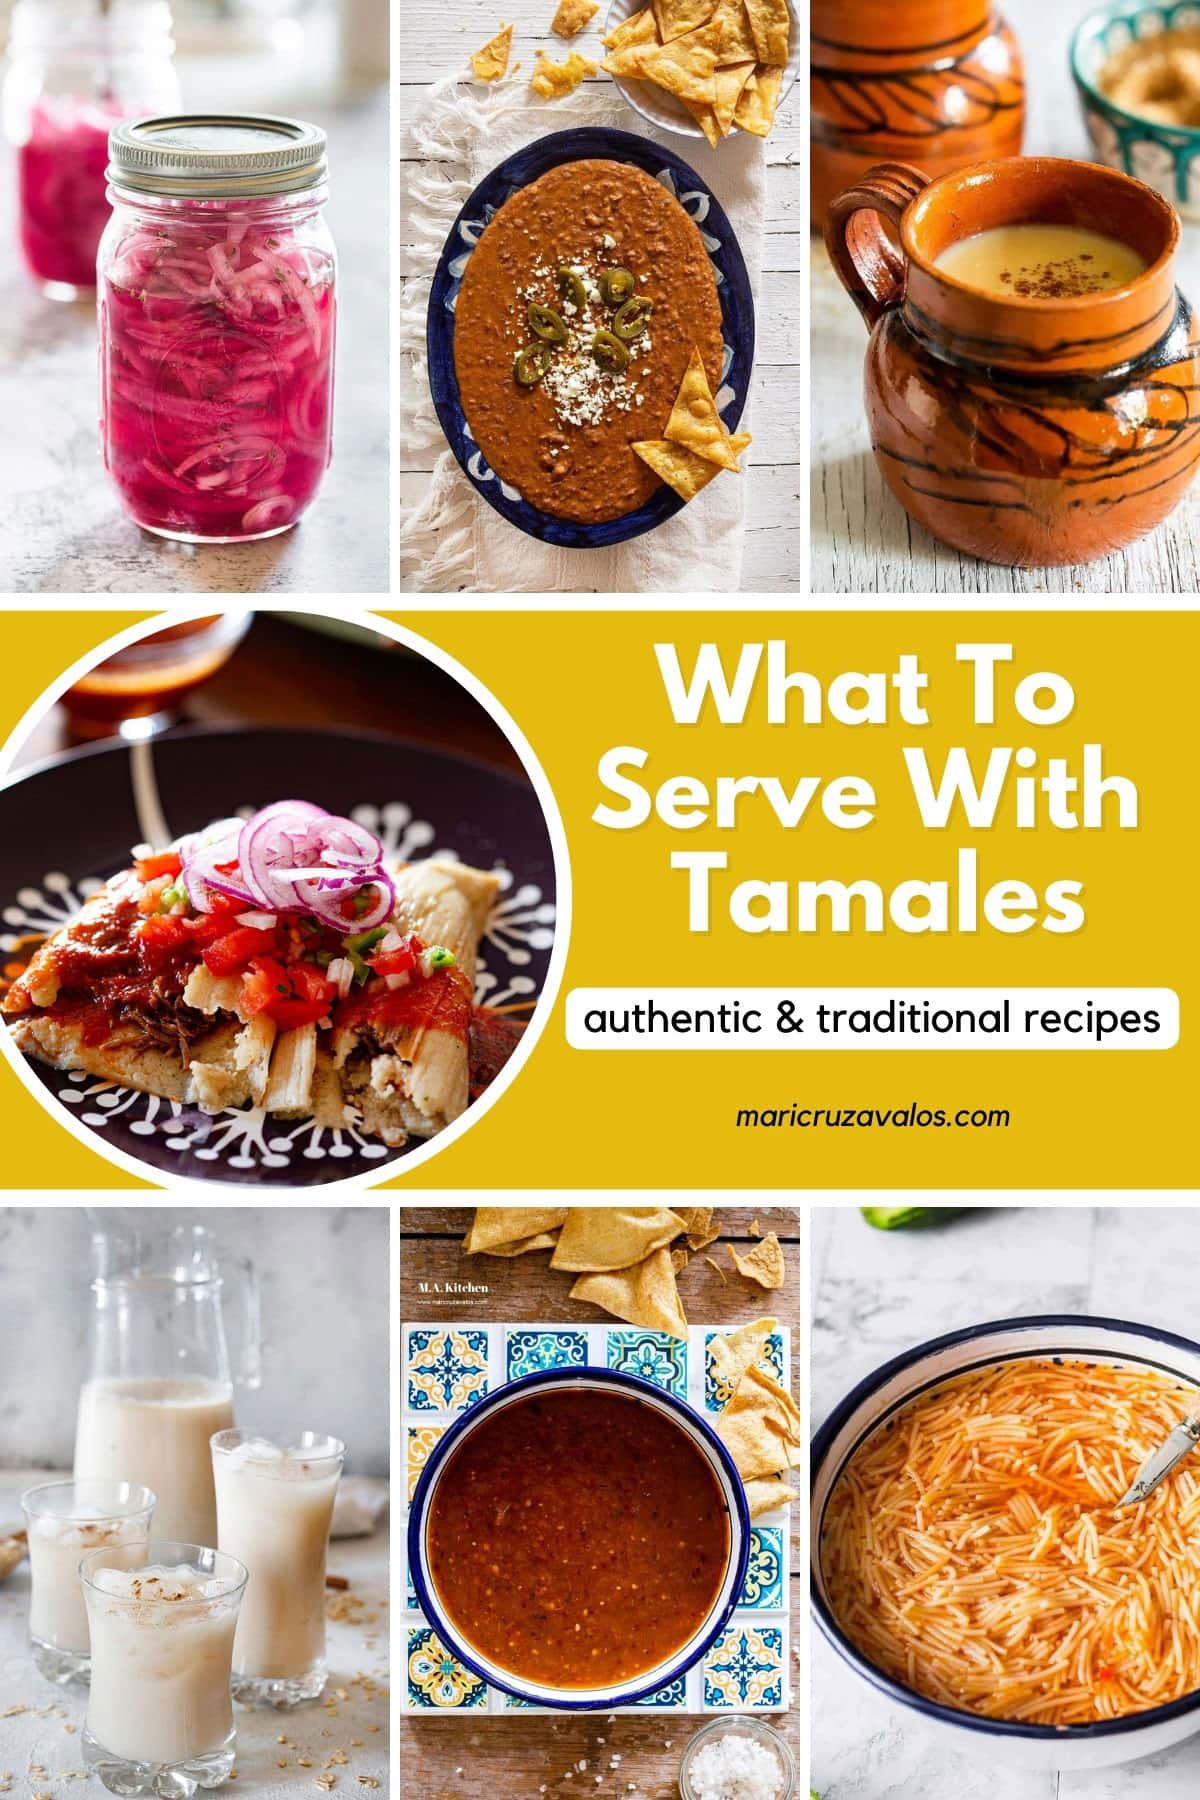 A collage with various photos of recipes for what to serve with tamales.